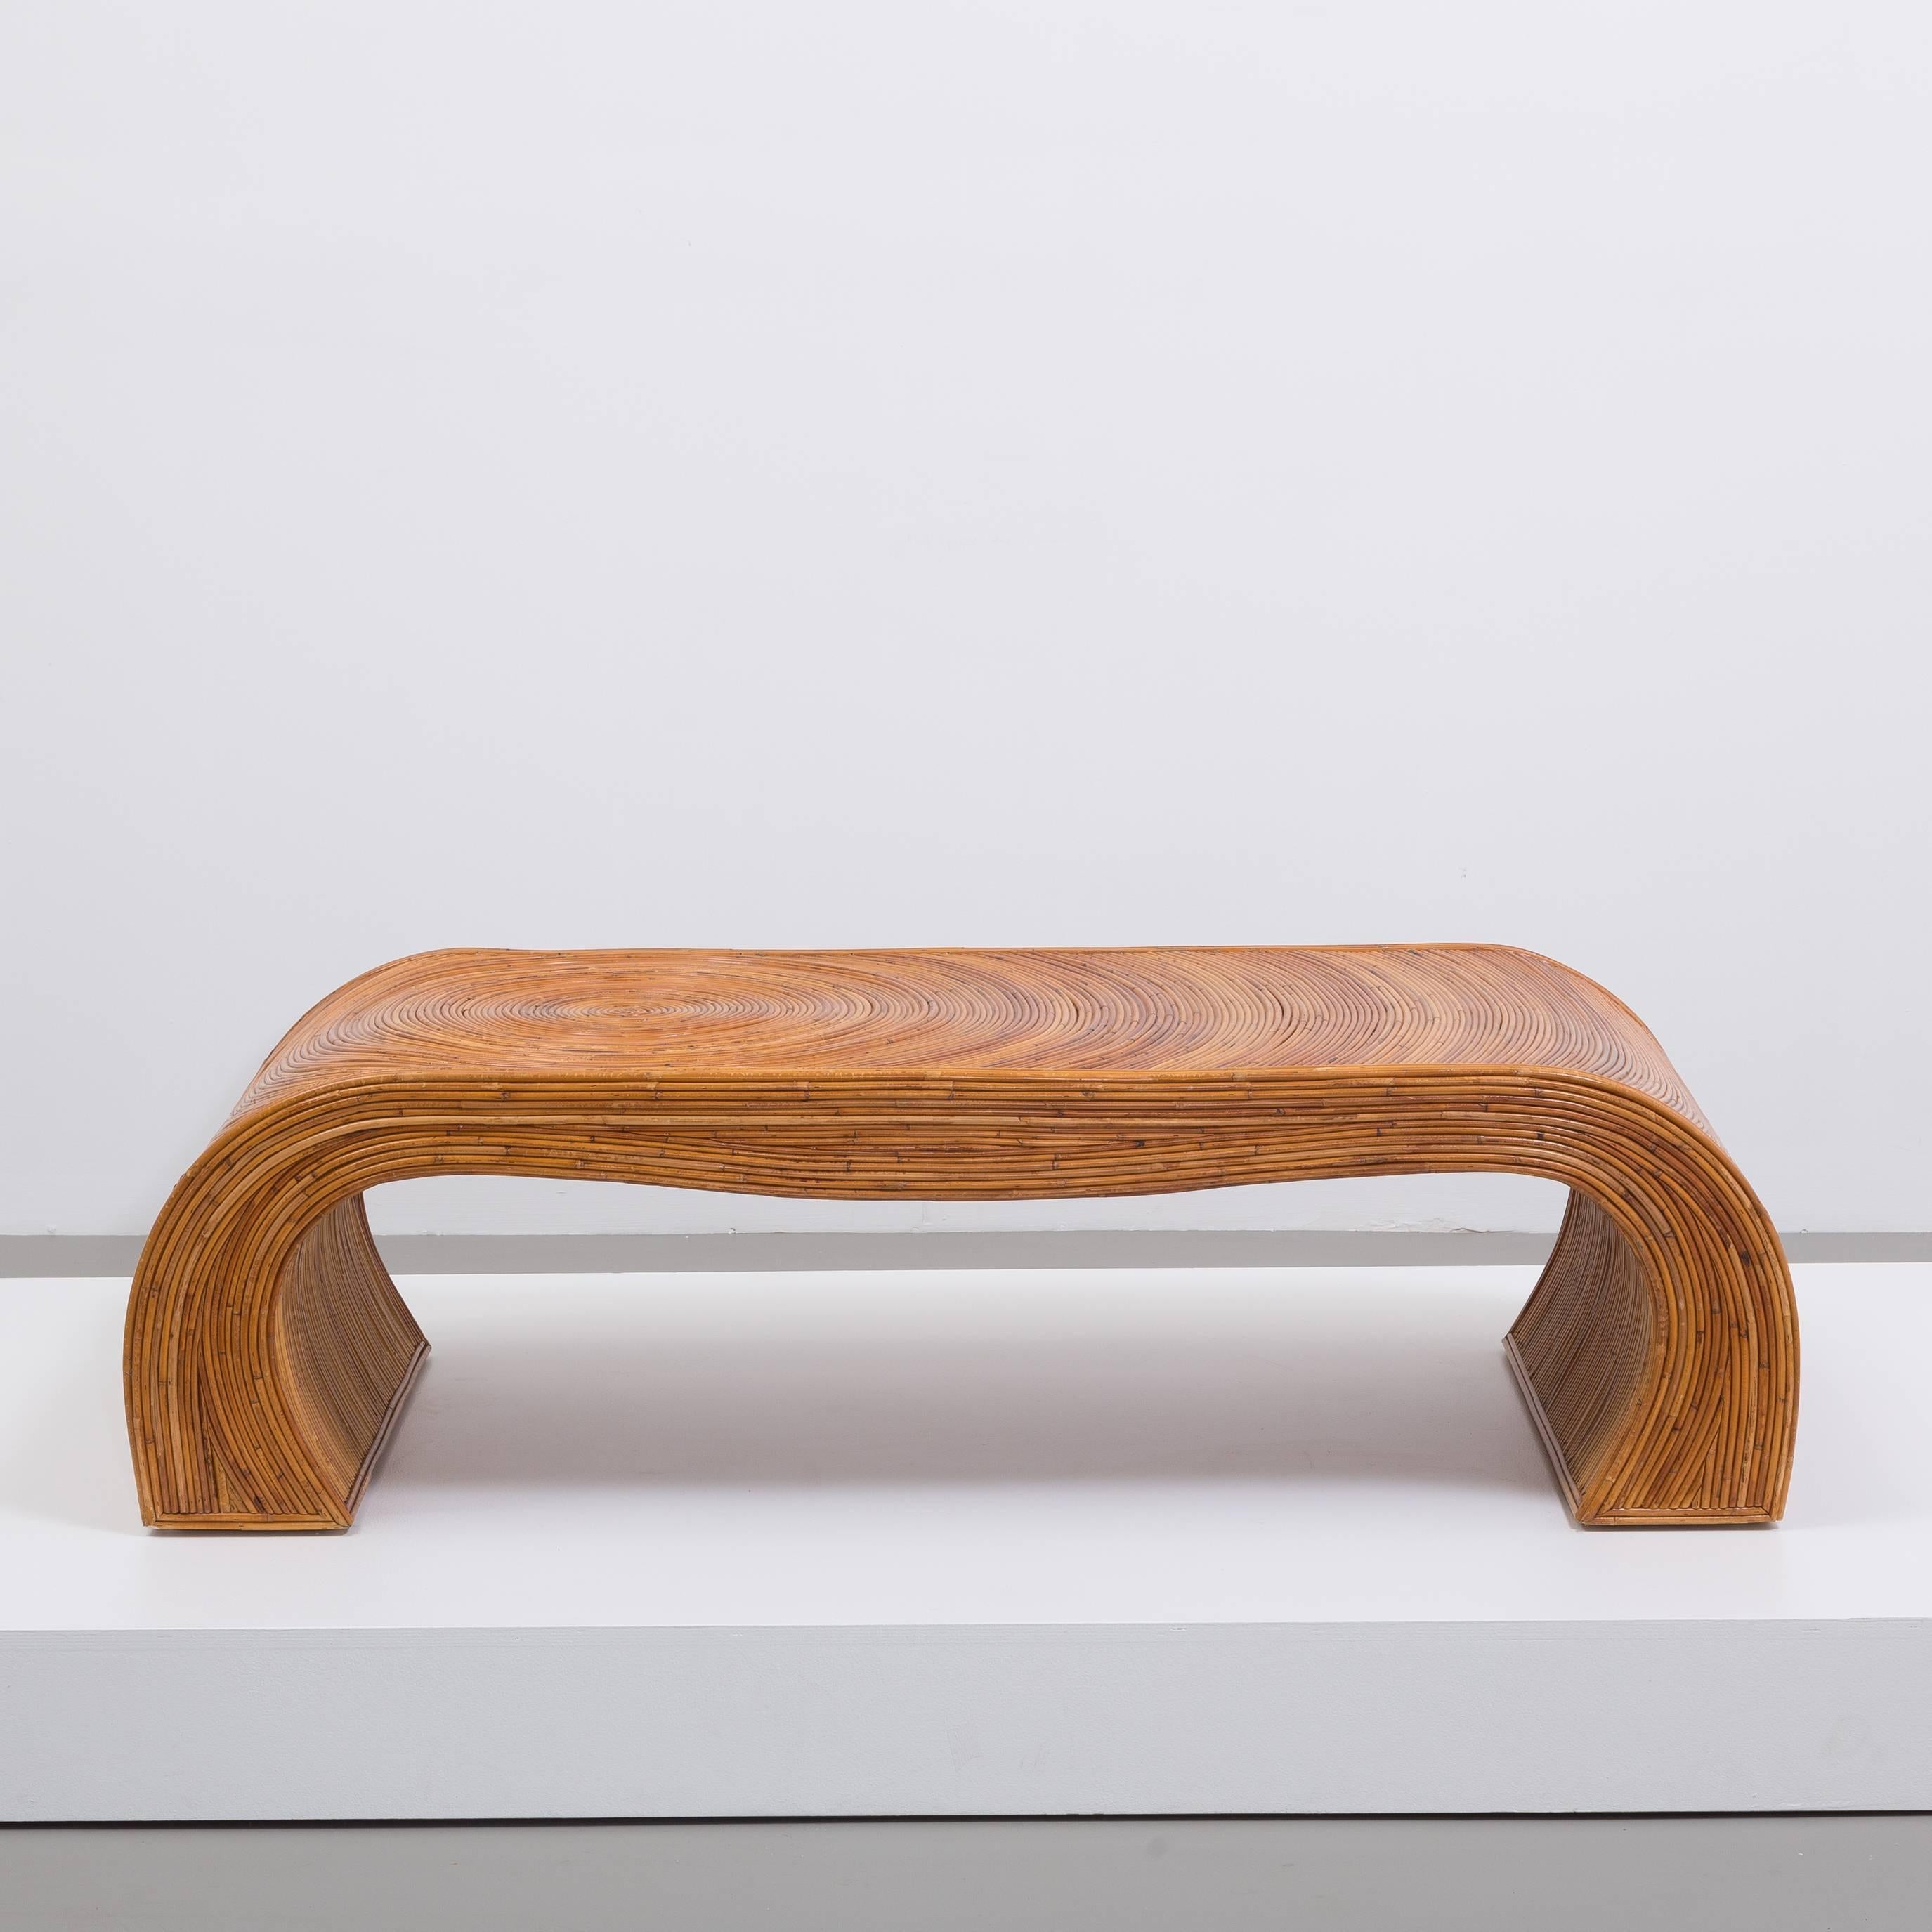 A Gabriella Crespi attributed waterfall bamboo coffee table, 1970s

Price includes 20% VAT which is removed for items shipped outside the EU.